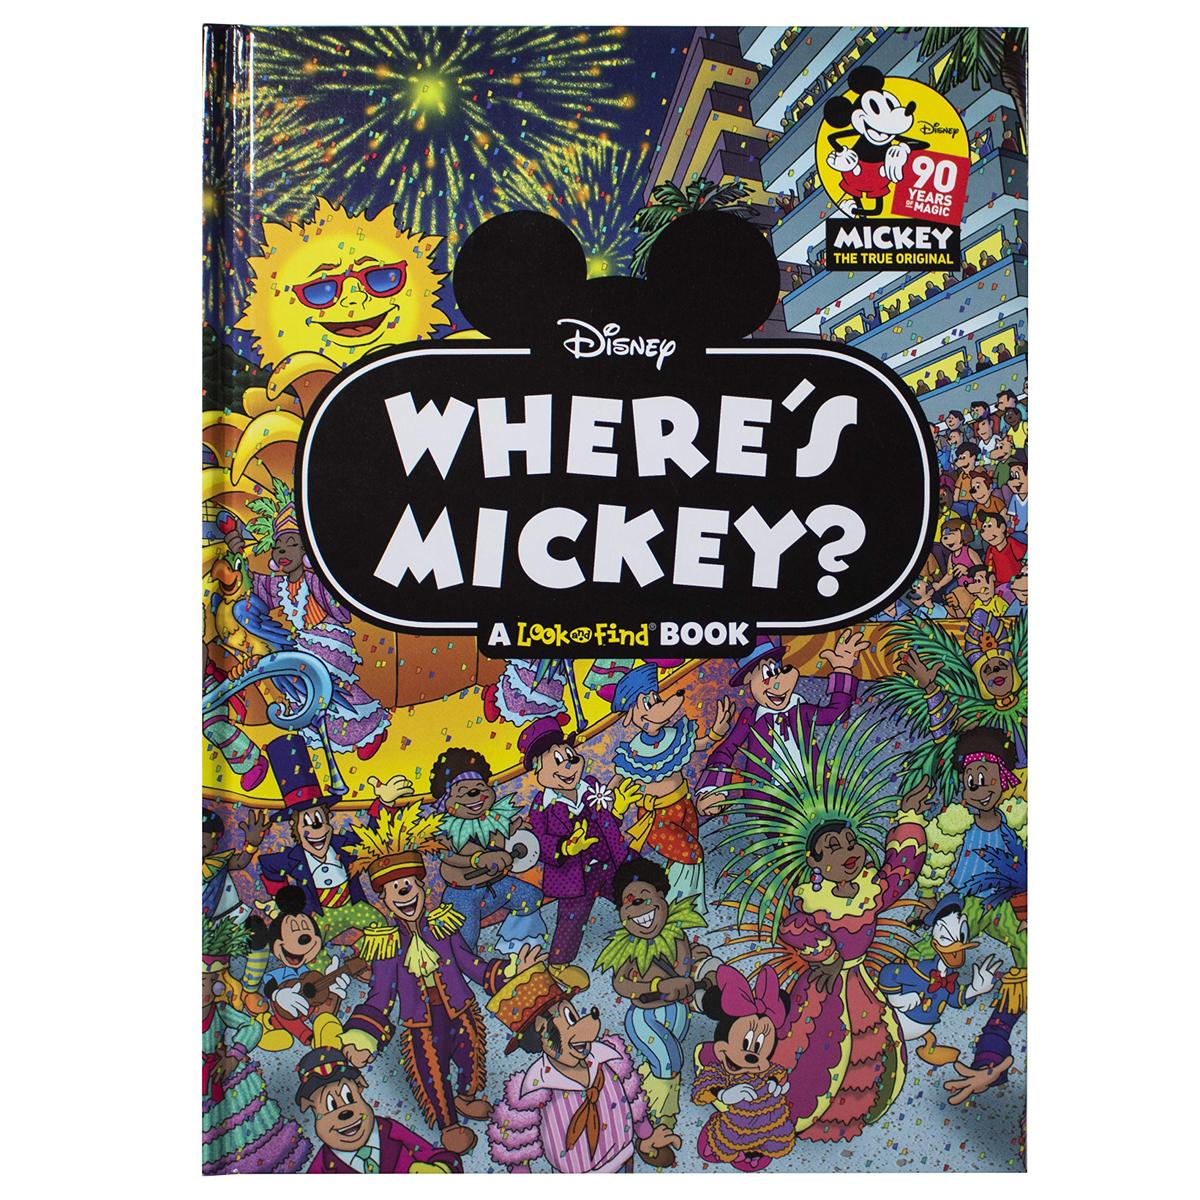 Wheres Mickey Mouse A Look and Find Book for $5.99